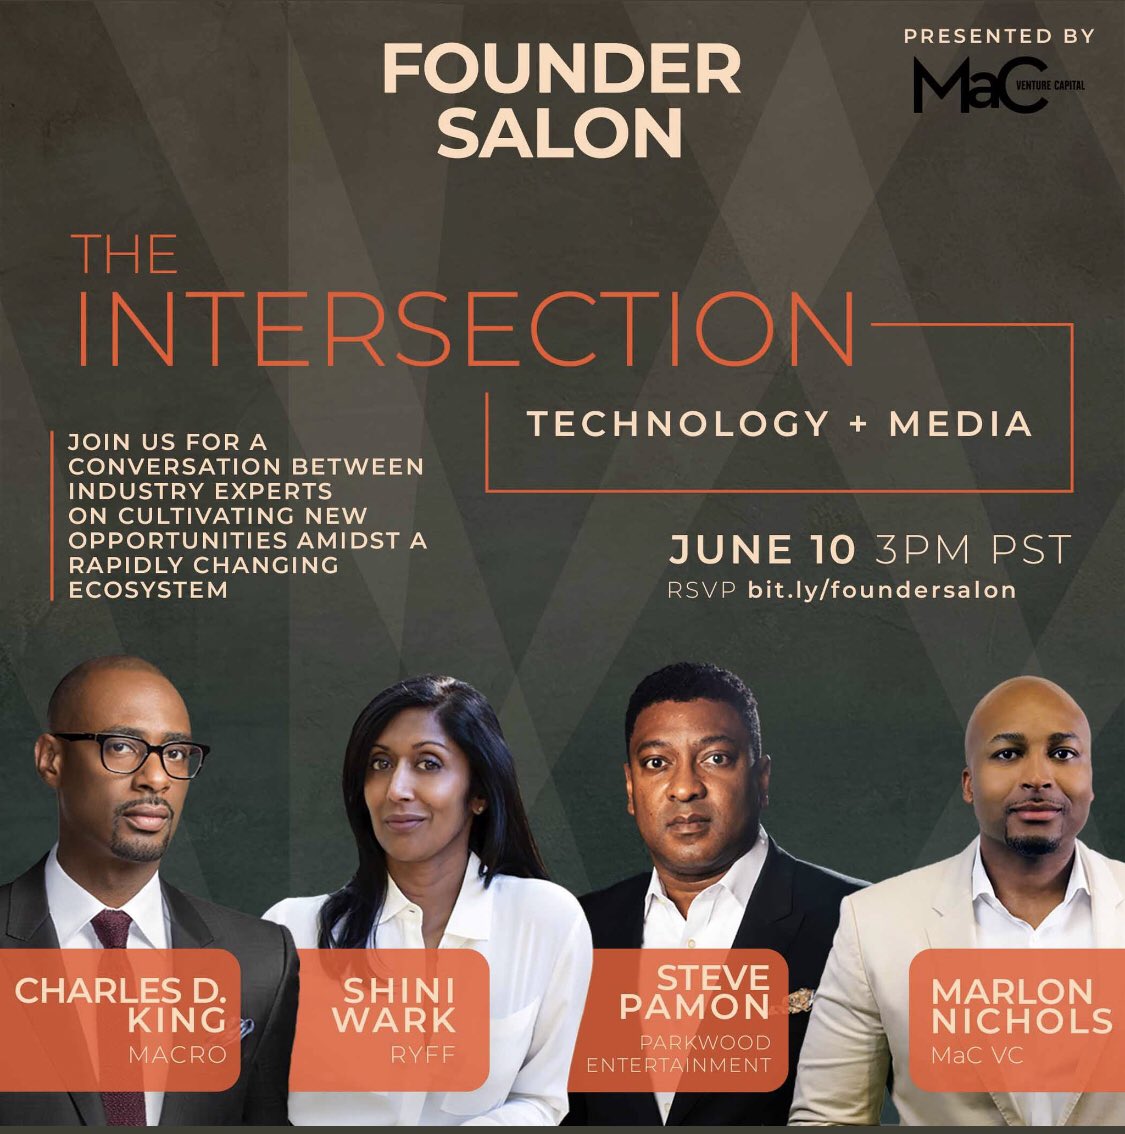 MaC VC Founder Salon | The Intersection of Technology and Media